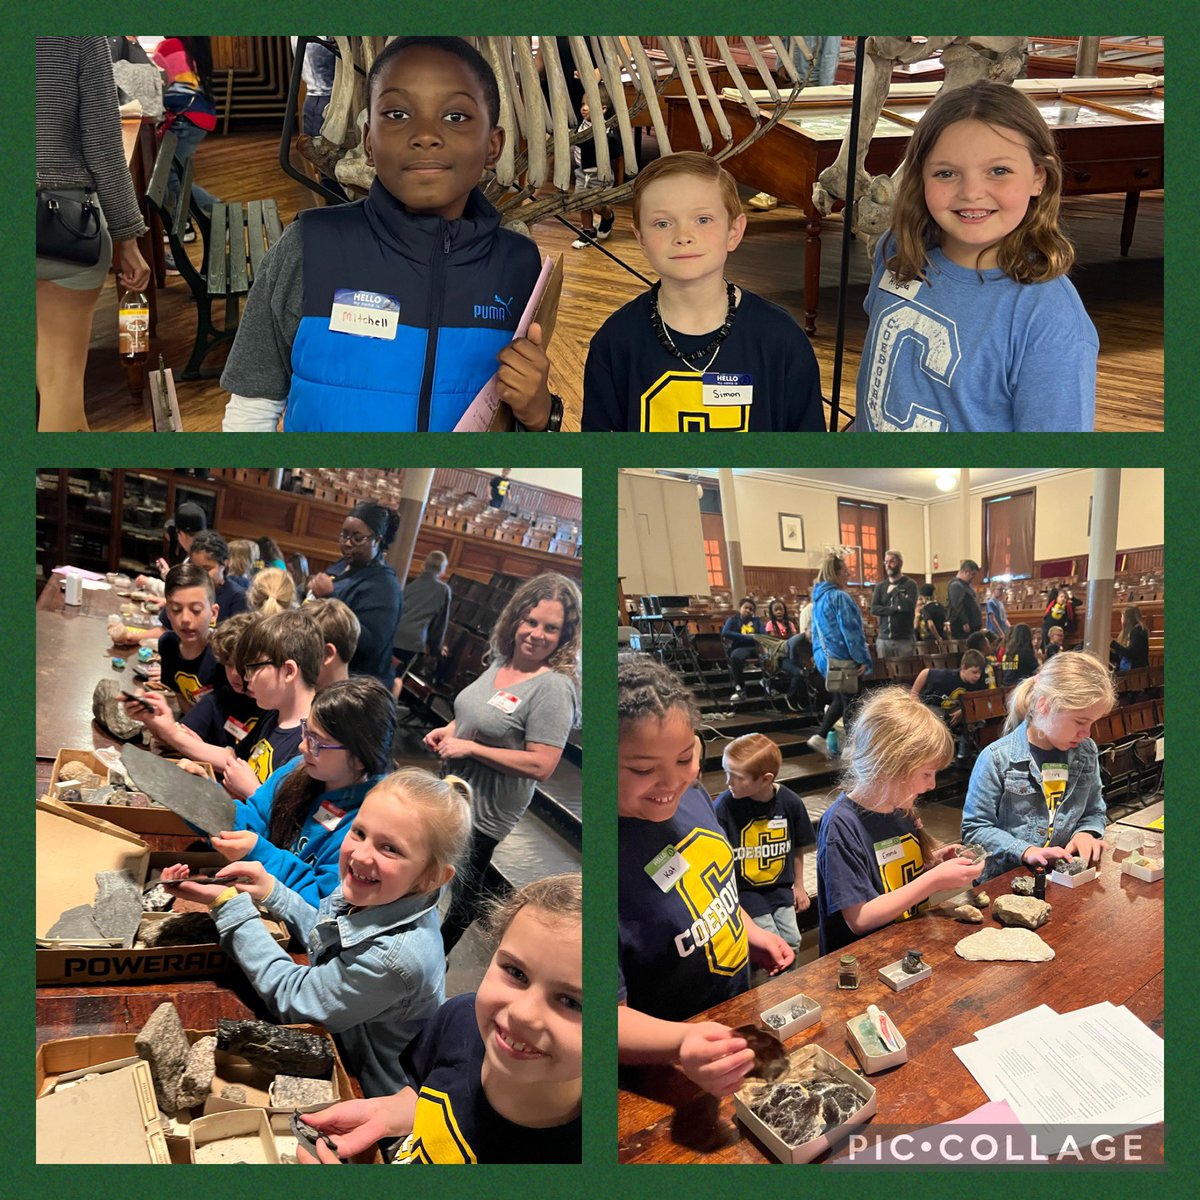 We had an amazing field trip at the @wagnerinstitute! We learned about different types of rocks and minerals and had so much fun exploring! @CoebournES